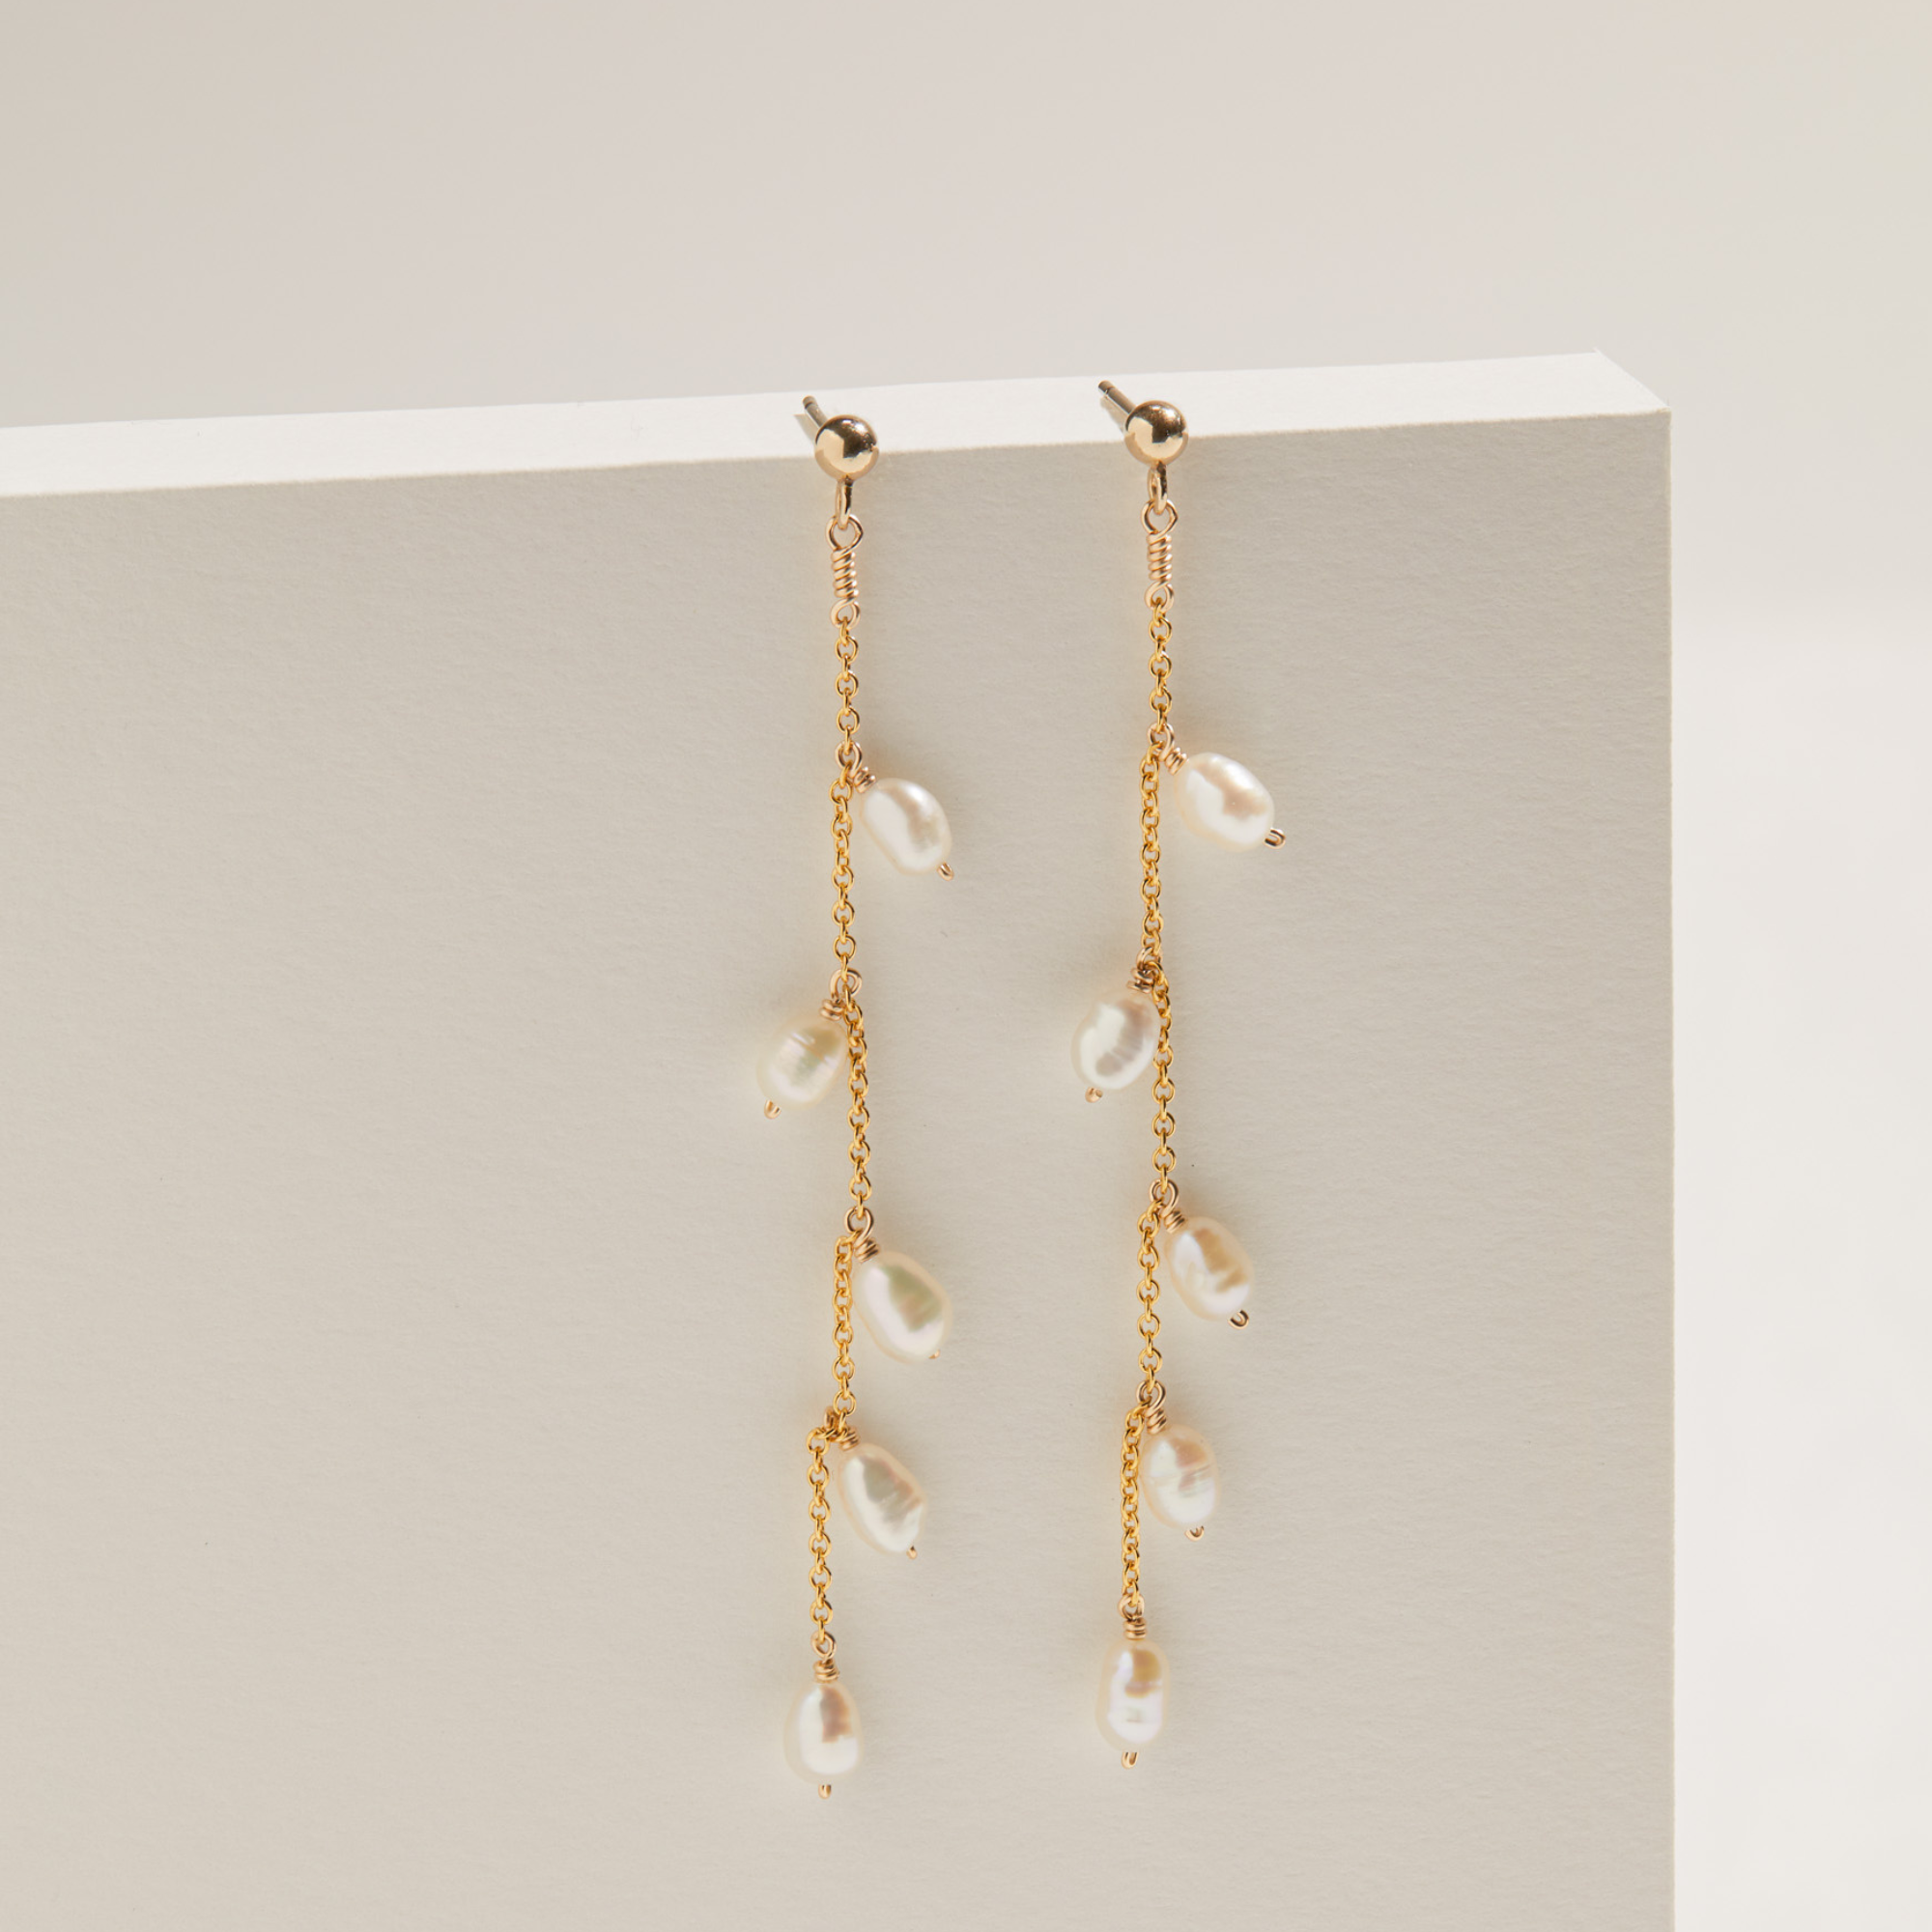 Gold seed pearl drop earrings hanging off the edge of a white block